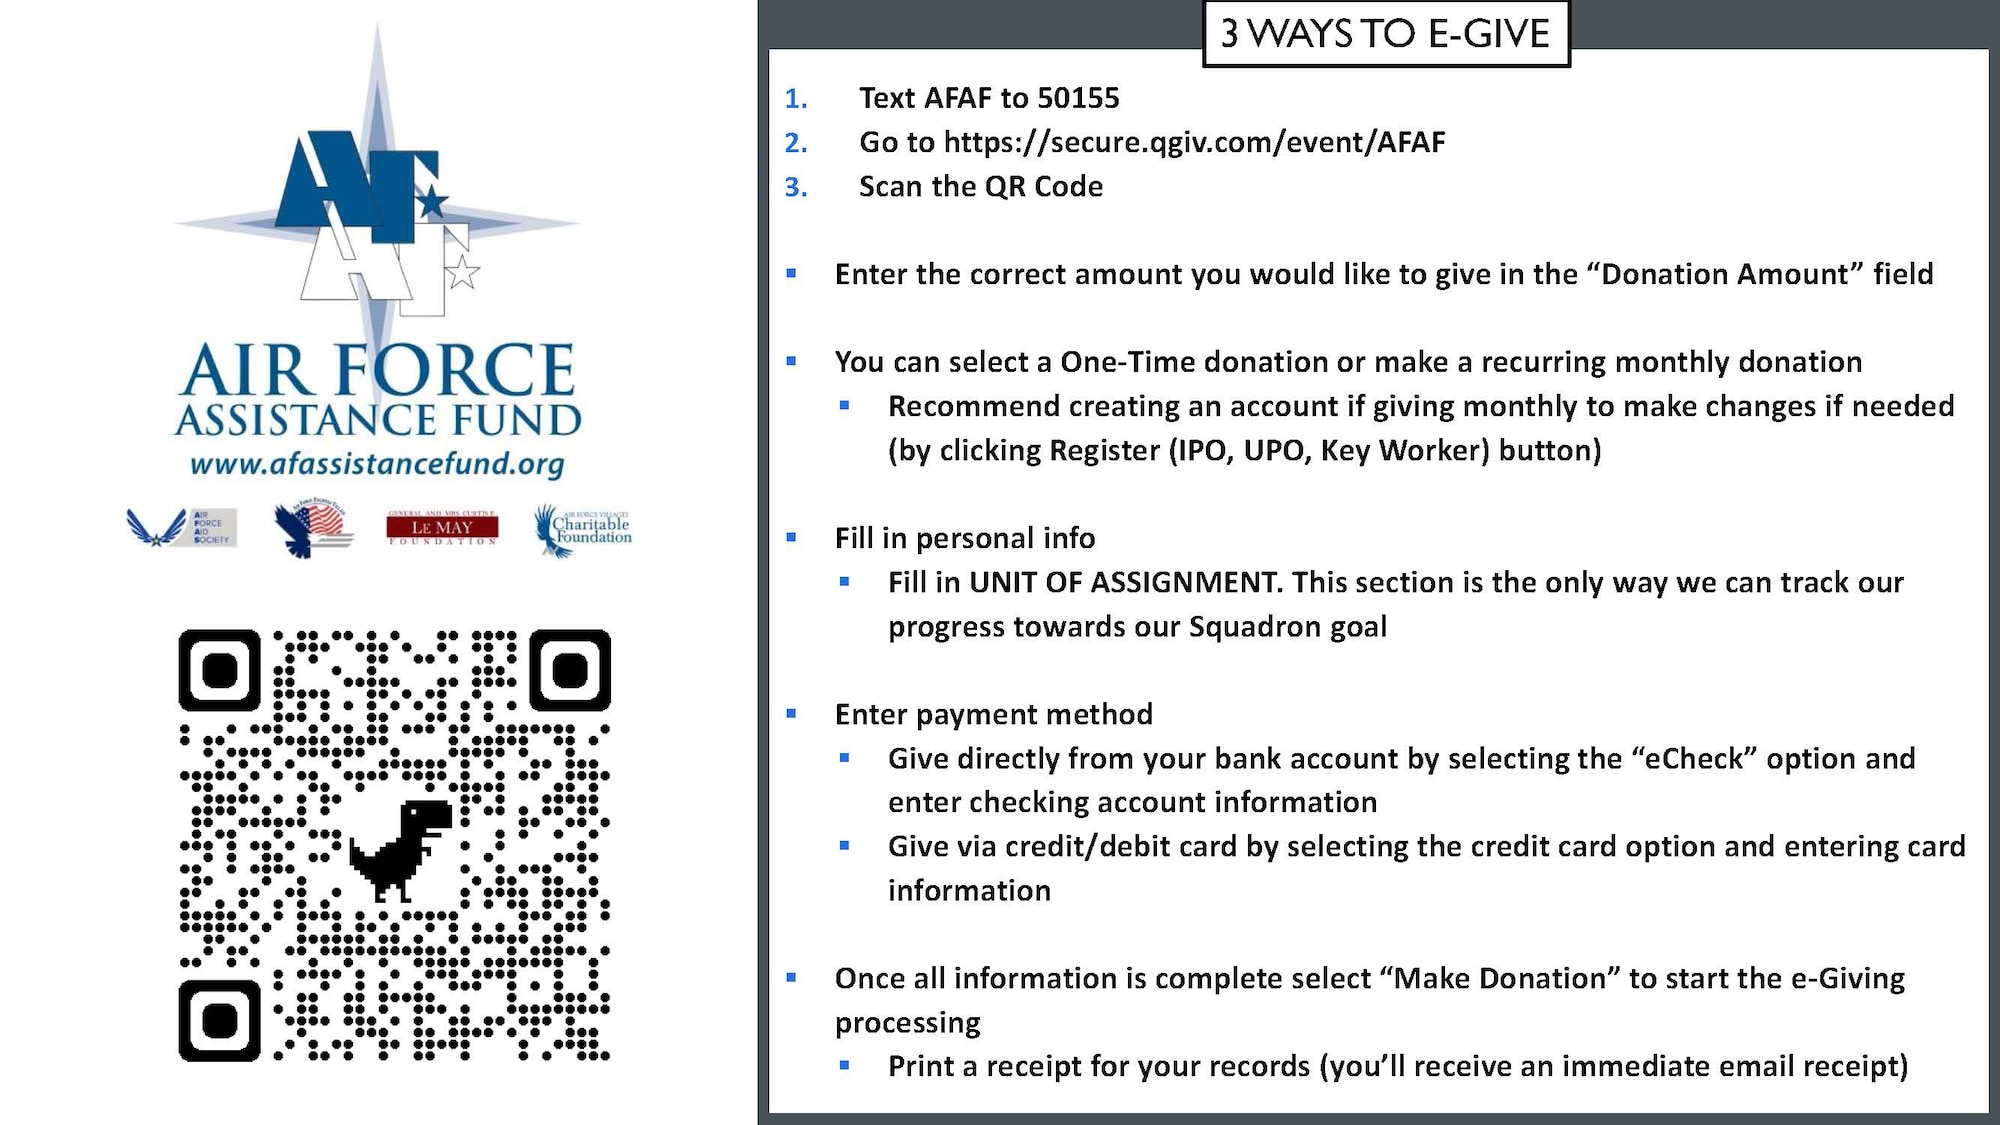 The Air Force Assistance Fund began at McChord Field April 11 and will last through May 13. Currently, there are three ways to donate. The first and preferred method is through e-giving. To donate electronically, donors can text “AFAF” to 50155 or visit https://secure.qgiv.com/event/afaf/team/895681/. People can also donate by payroll deduction plans and through cash or check. (Courtesy Graphic)